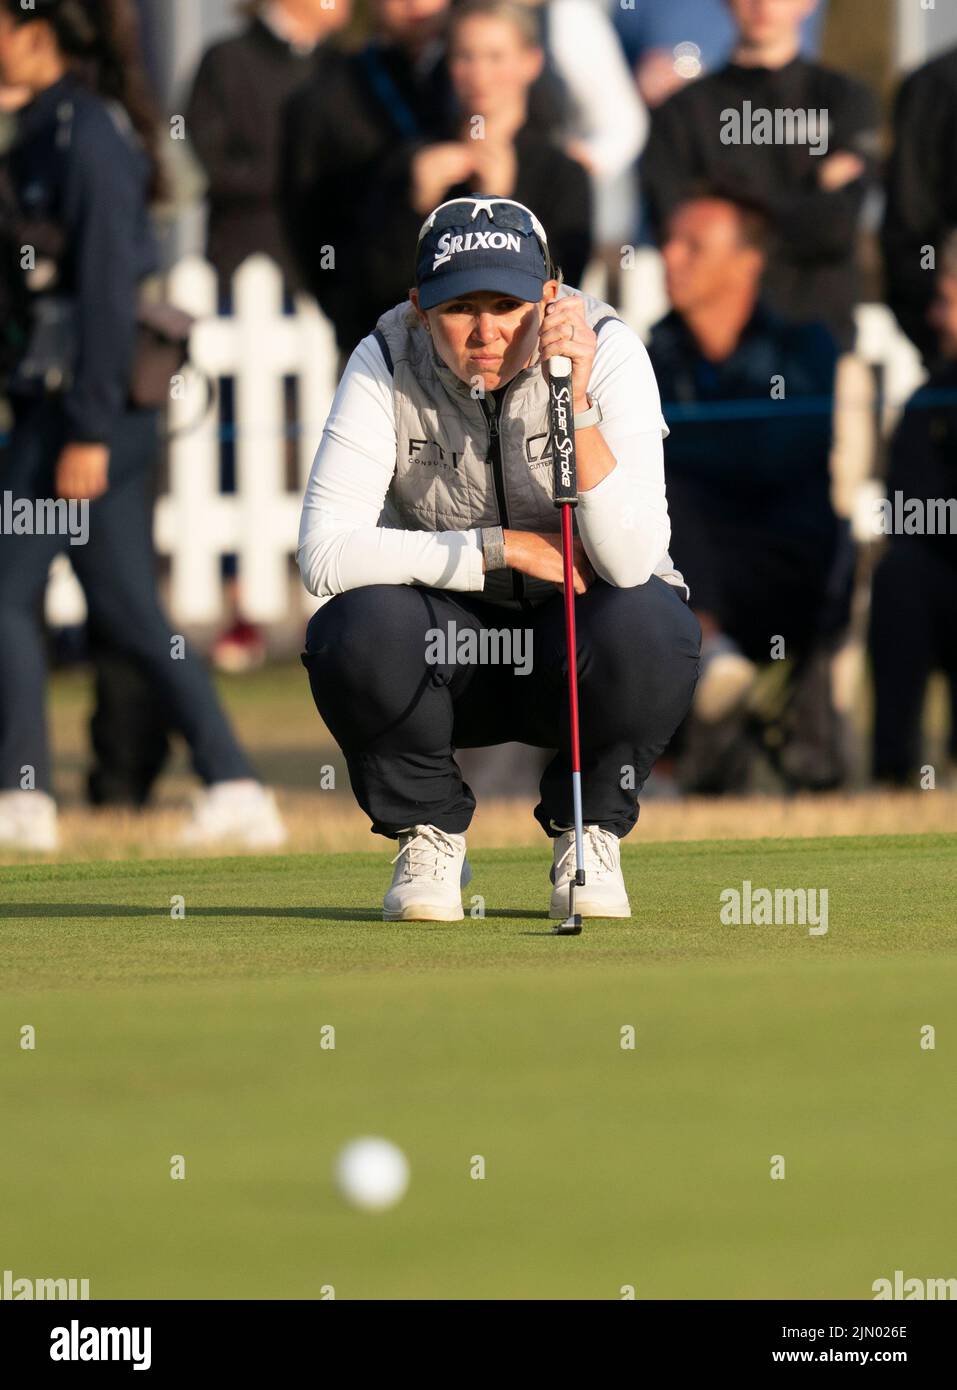 Gullane, Scotland, UK. 7th August 2022. Final  round of the AIG Women’s Open golf championship at Muirfield in Gullane, East Lothian. Pic; Ashleigh Buhai lines up her putt on the 18th green.  Iain Masterton/Alamy Live News Stock Photo